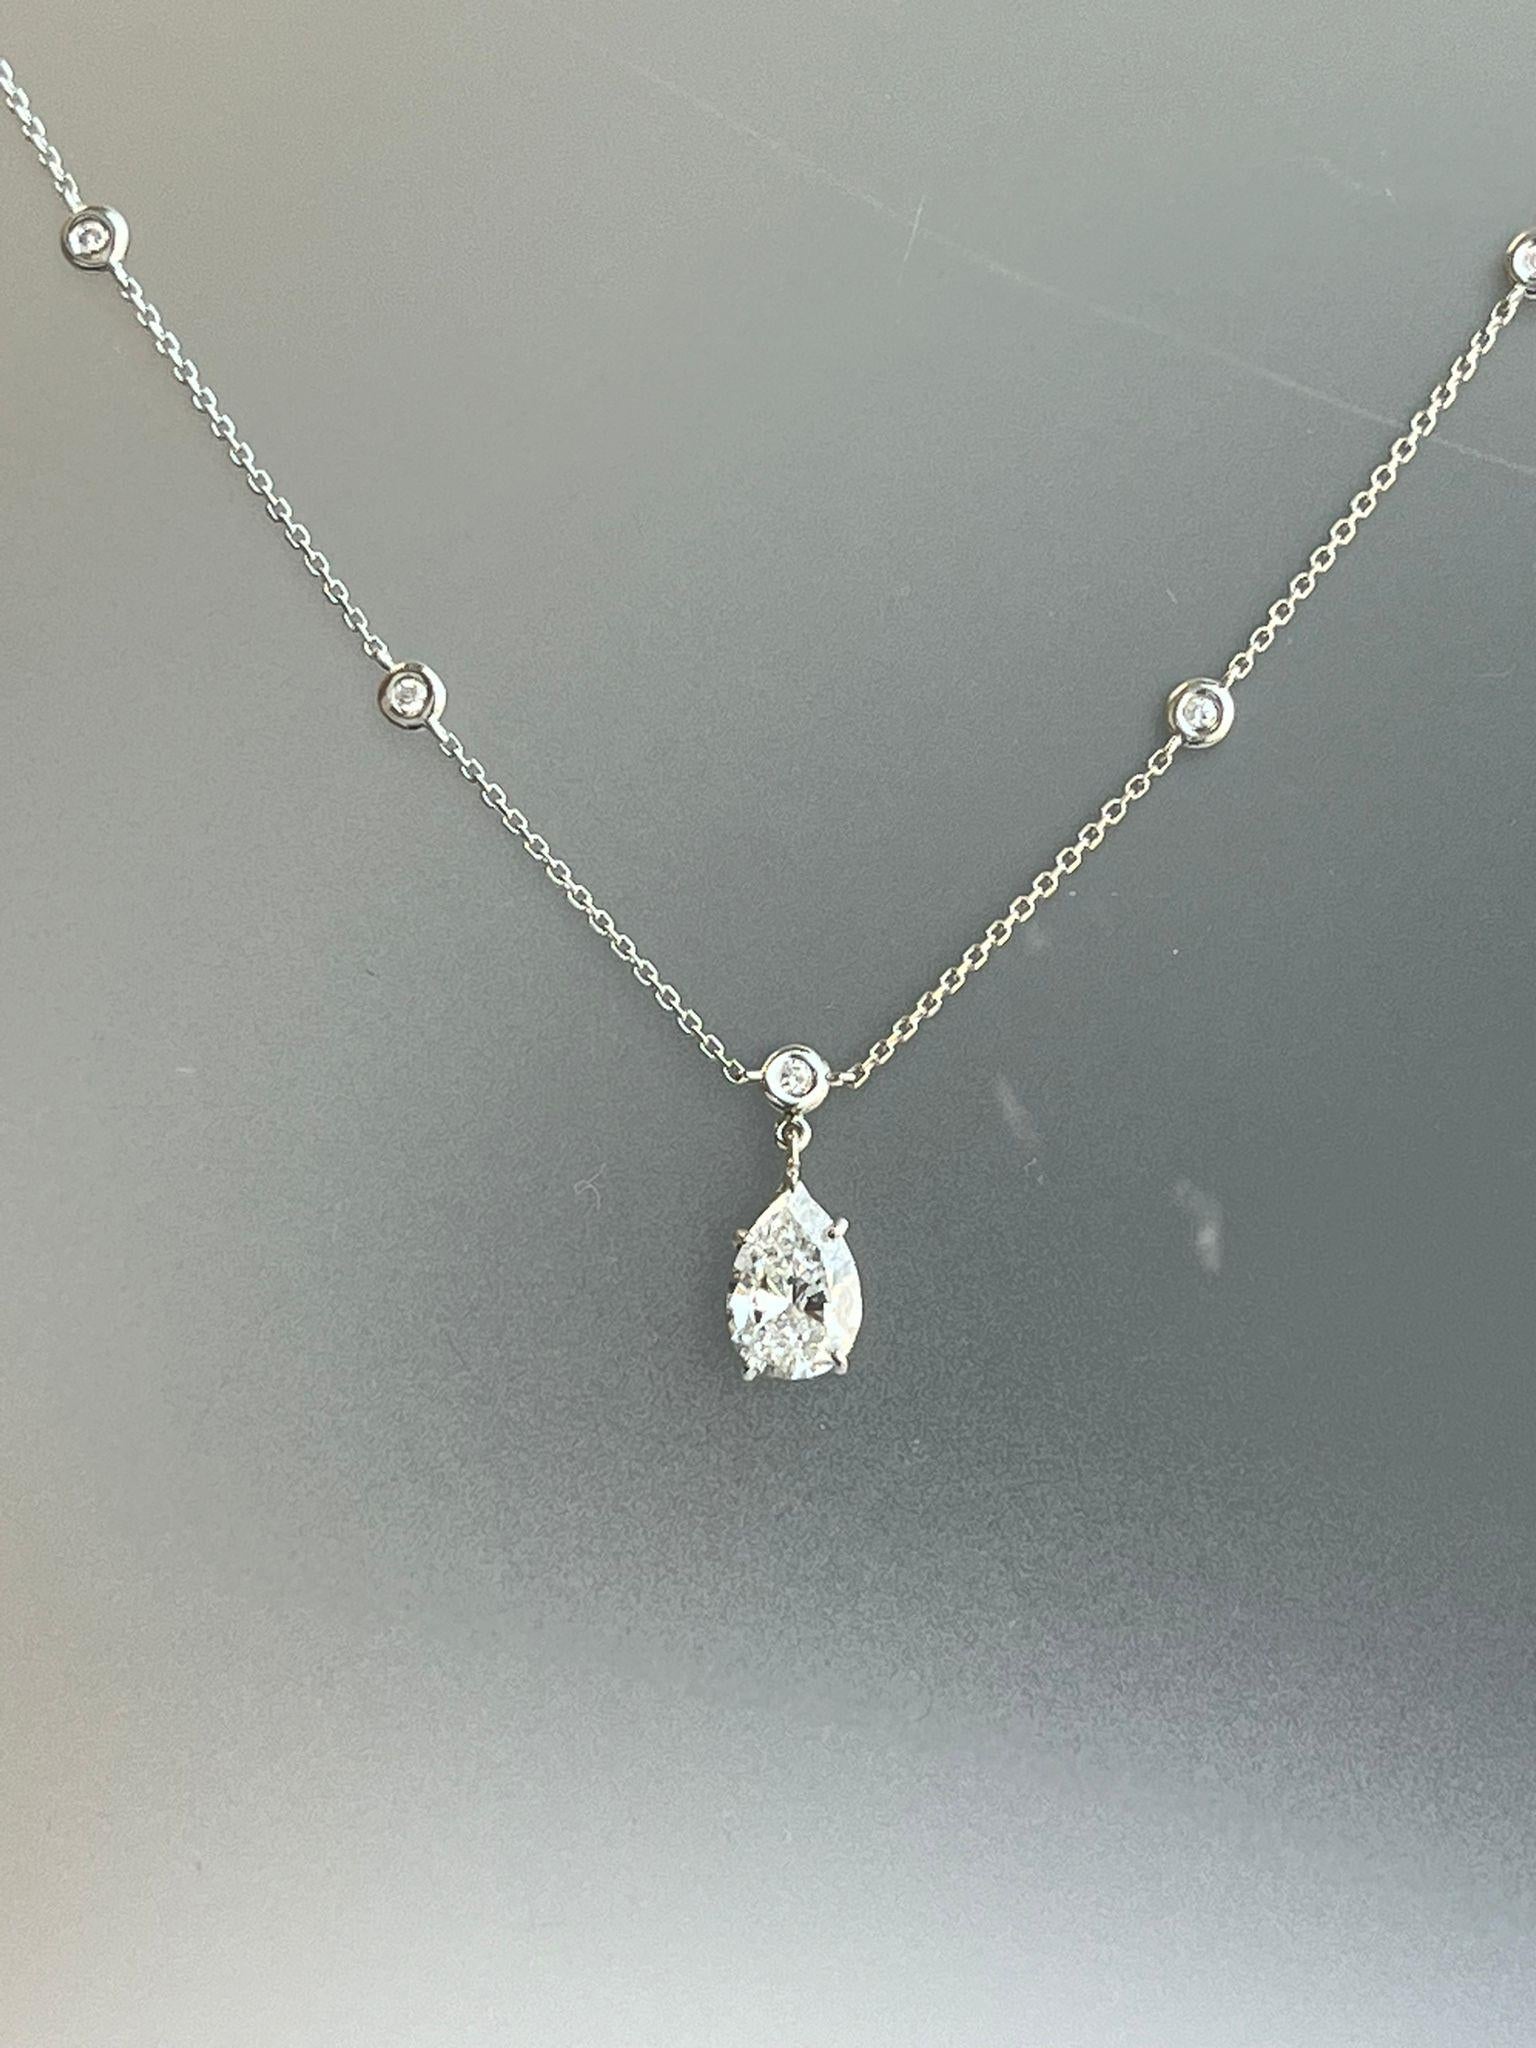 1.56ct Pear Shape Diamond Link Chain Station Necklace Pendant 14K White Gold For Sale 2